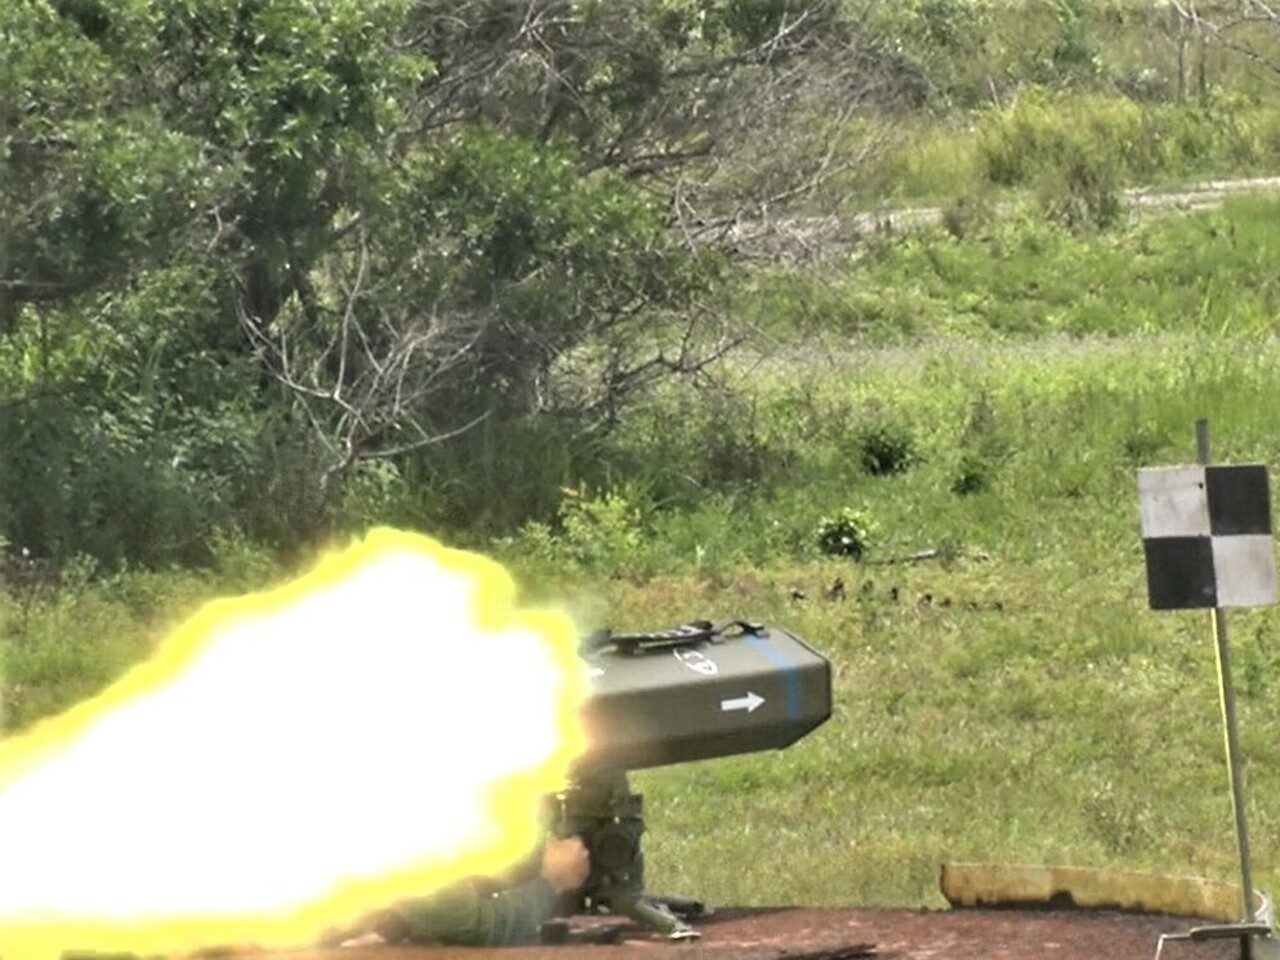 The Army Assessment Center (CAEx) supported the Army Technology Center (CTEx) and the company SIATT Engenharia, Indústria e Comércio during the test phase of the 1.2 Anti-tanker Surface-to-Surface Missile System (MSS 1.2 AC)